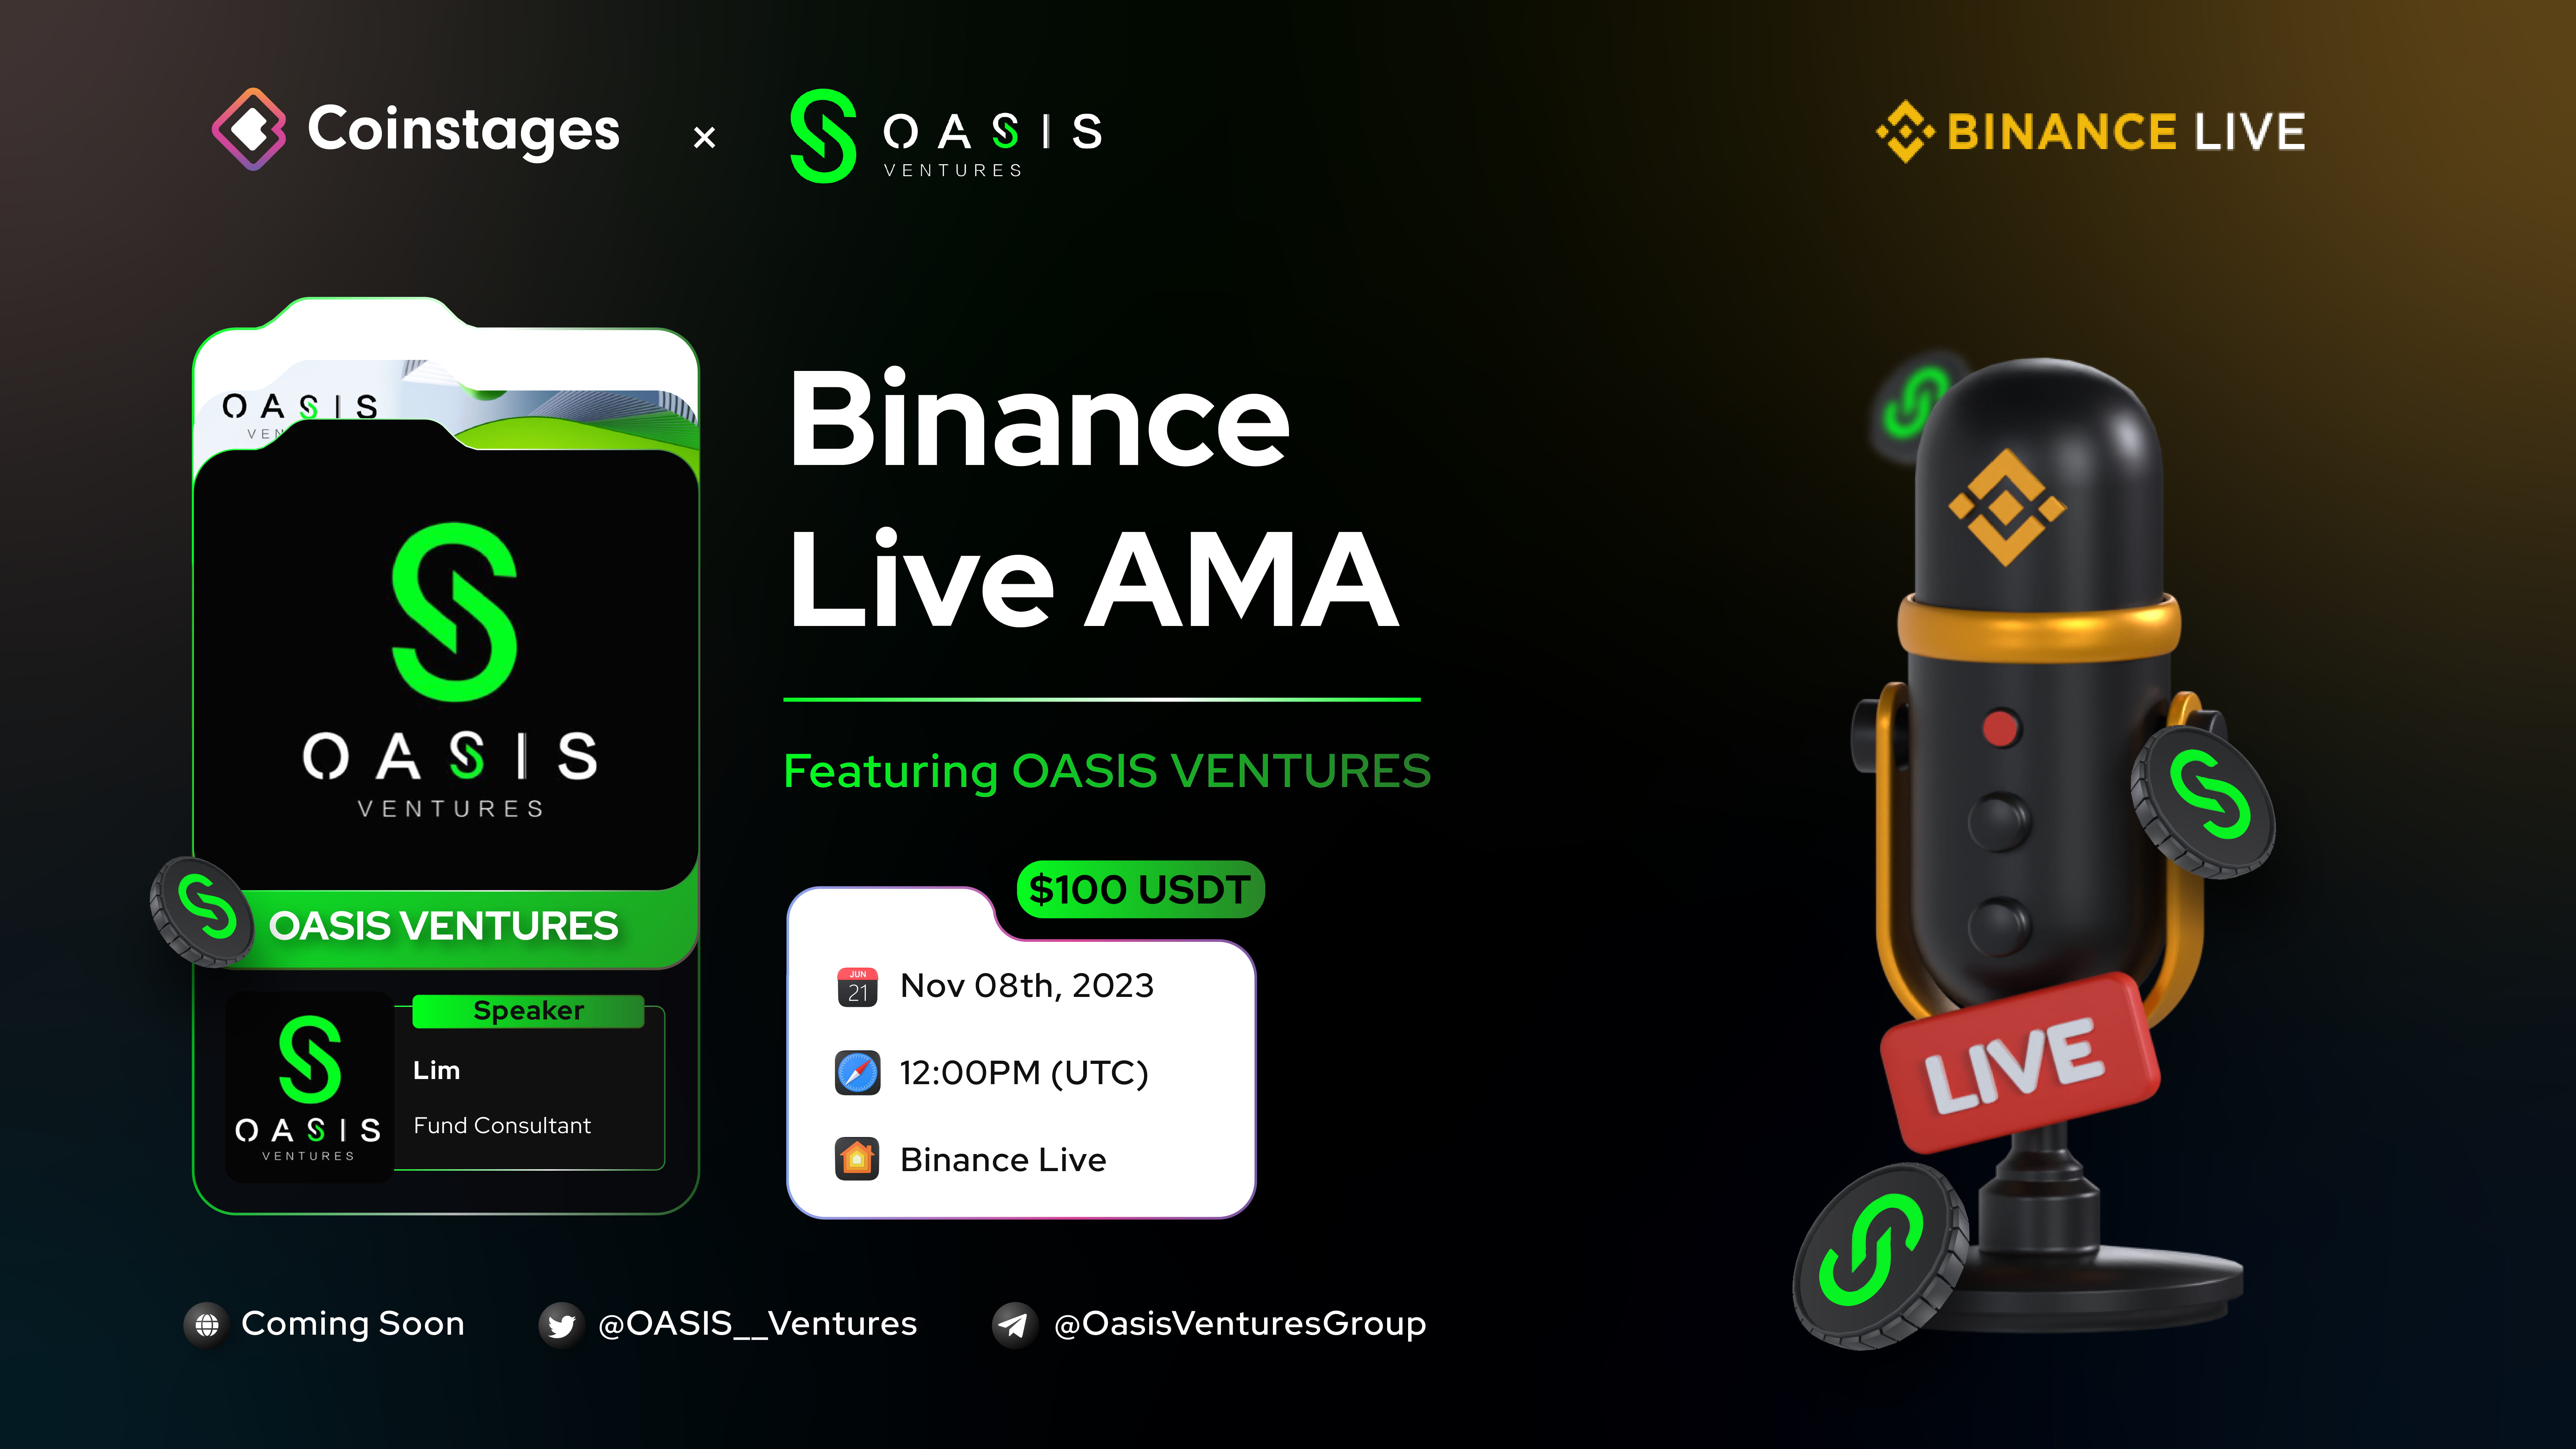 Coinstages Live AMA: Featuring Oasis Ventures